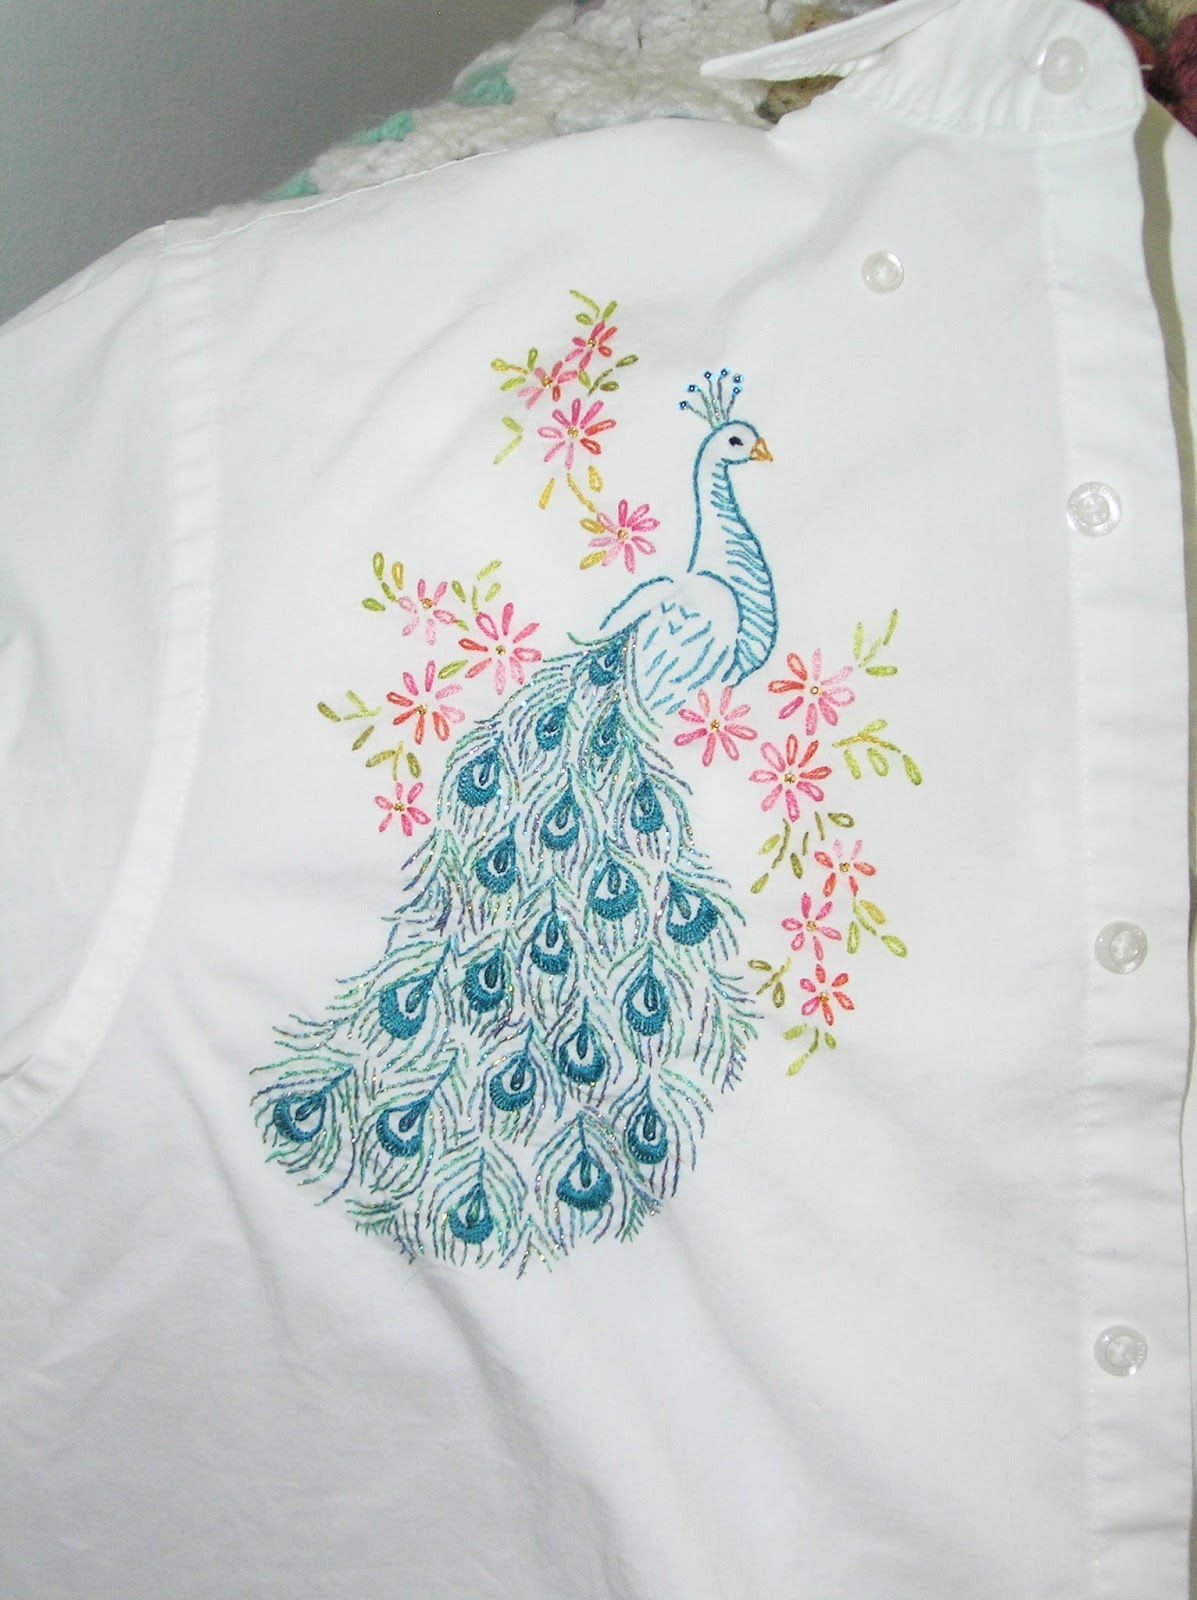 Peacock Embroidery Patterns Kitty And Me Designs Peacock Embroidery Pattern